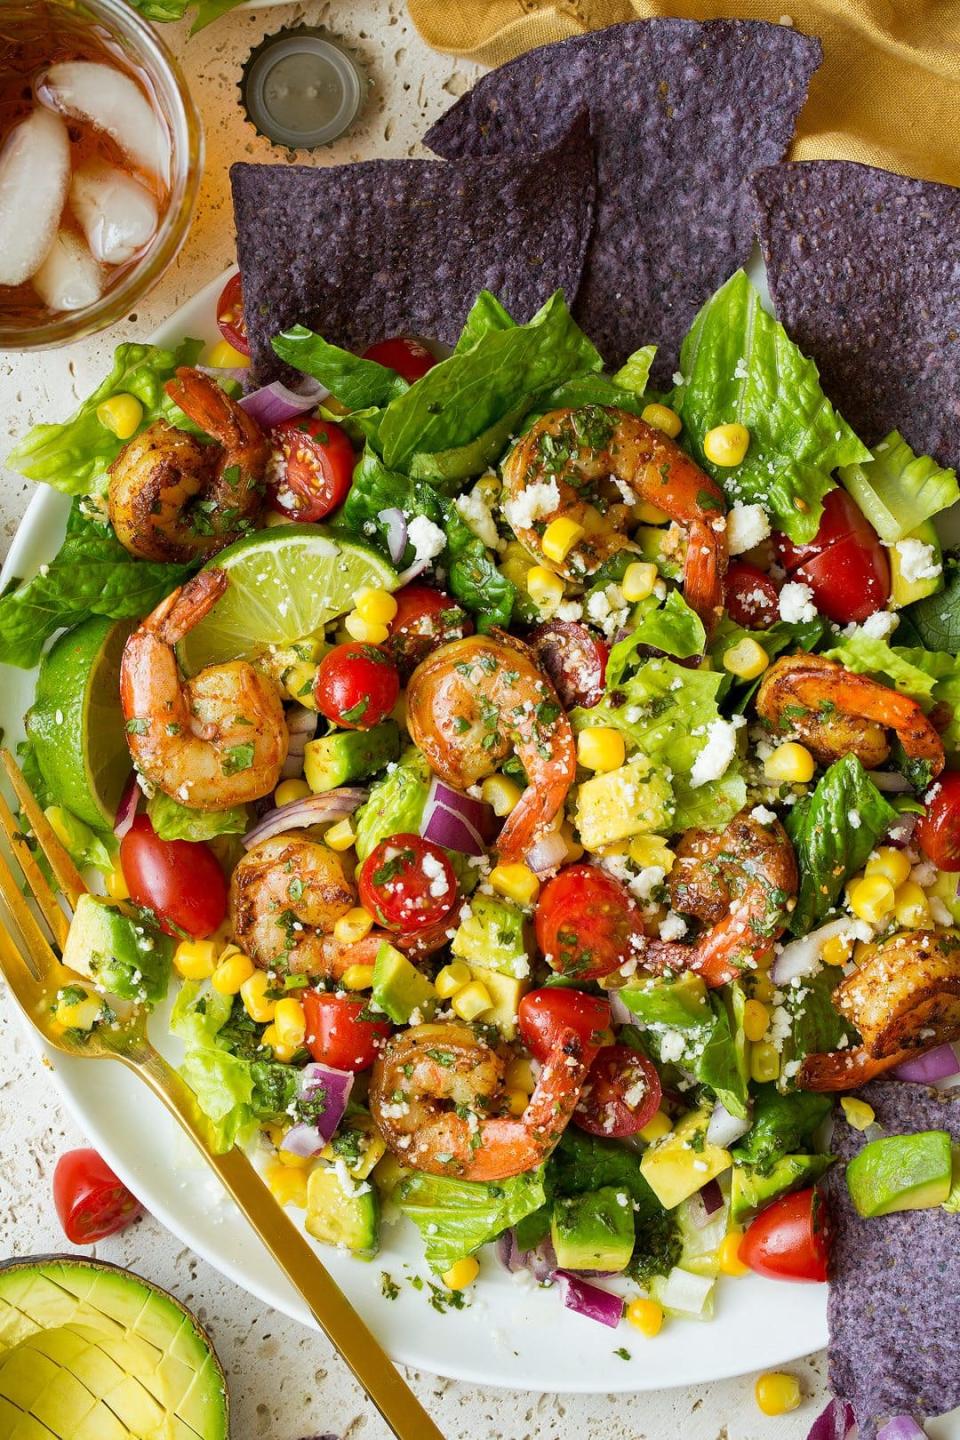 Shrimp and Avocado Salad With Cilantro-Lime Vinaigrette from Cooking Classy